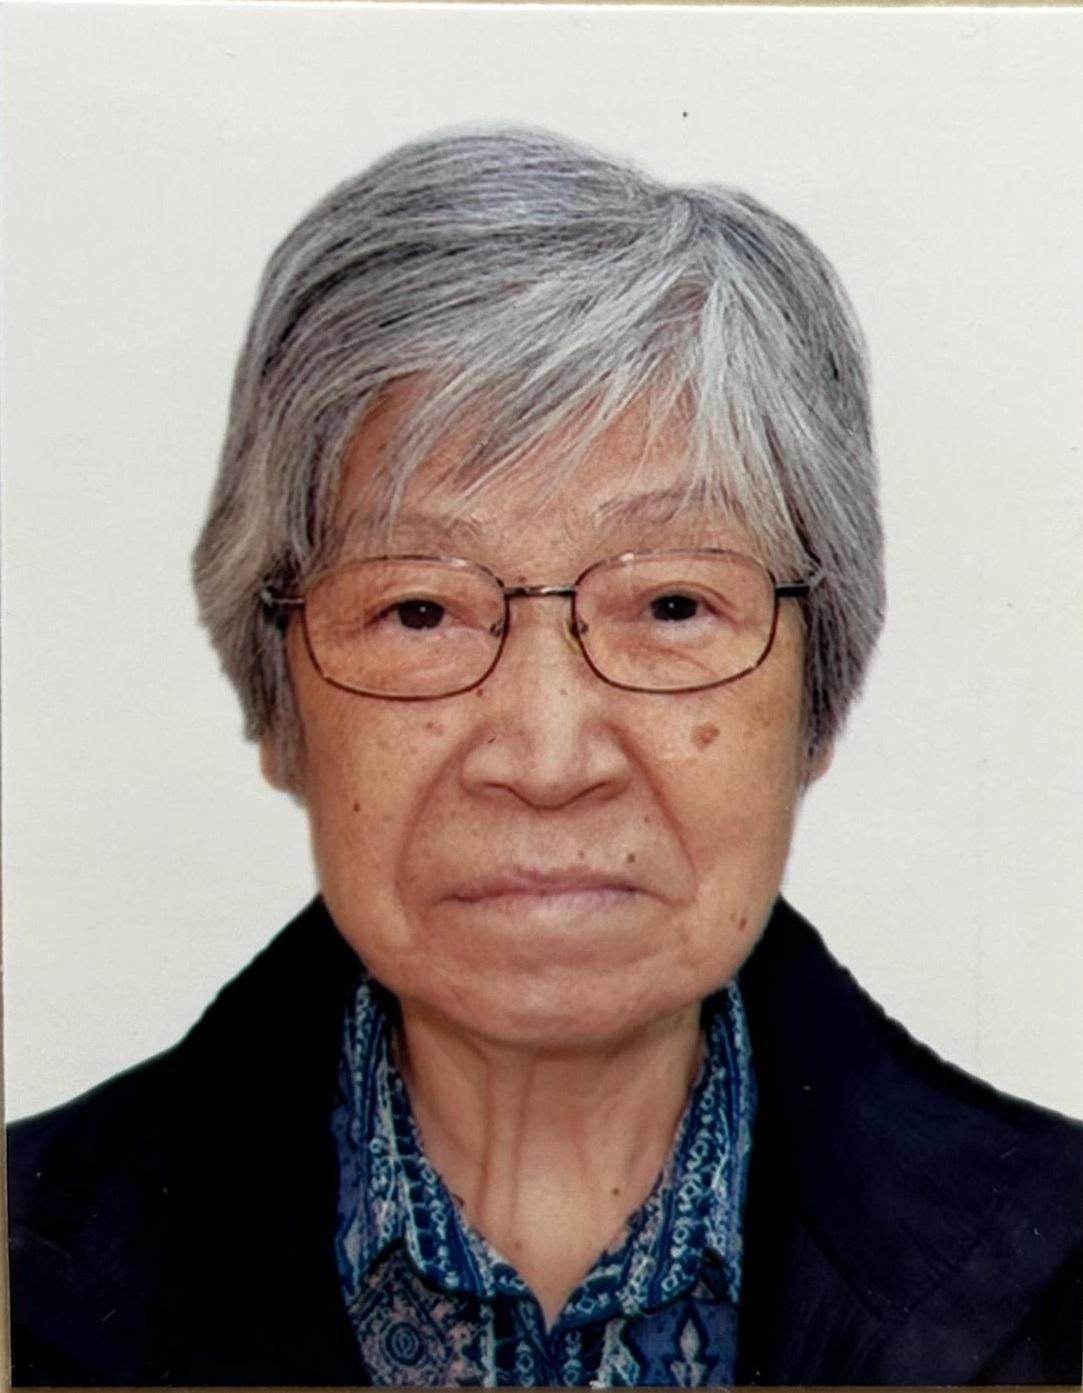 Yuen Yan-shin, aged 82, is about 1.5 metres tall, 60 kilograms in weight and of medium build. She has a round face with yellow complexion and short grey hair. She was last seen wearing an white hat, a purple long-sleeved T-shirt, black and white pants, black shoes and carrying a brown crossbody bag.